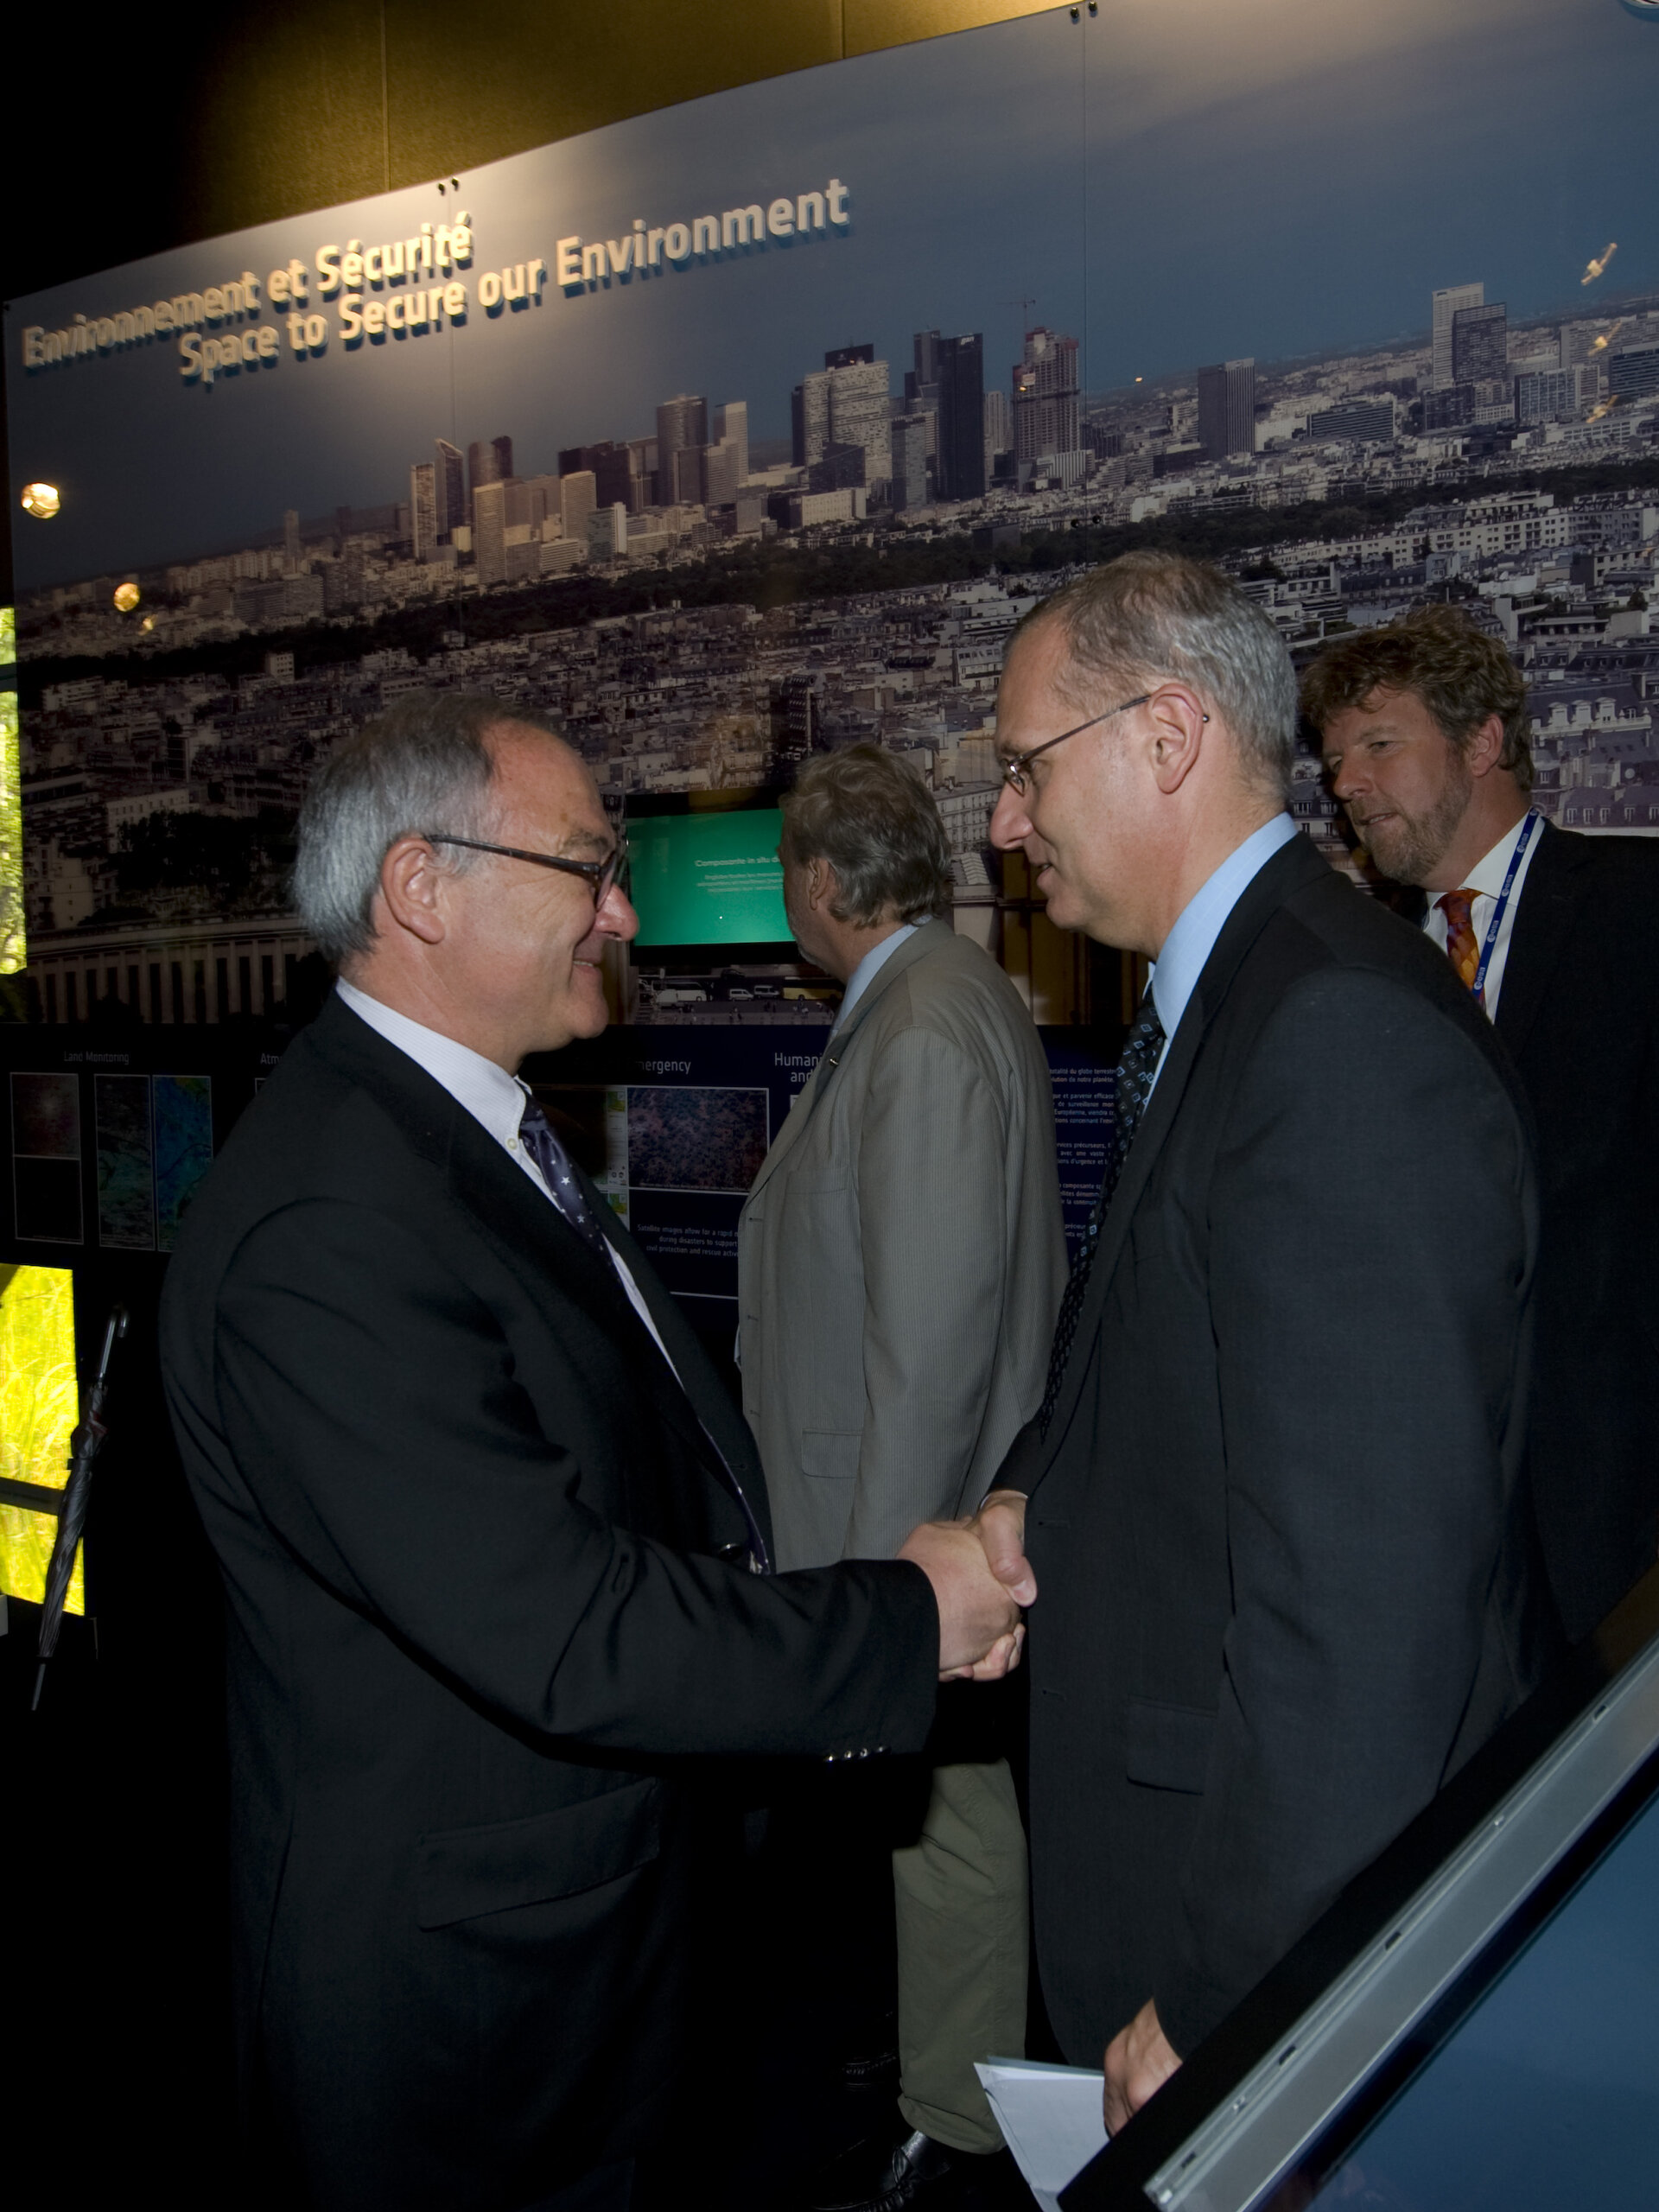 Mr Dordain welcomes Mr Jean-Yves Le Gall to the ESA Pavilion at Le Bourget